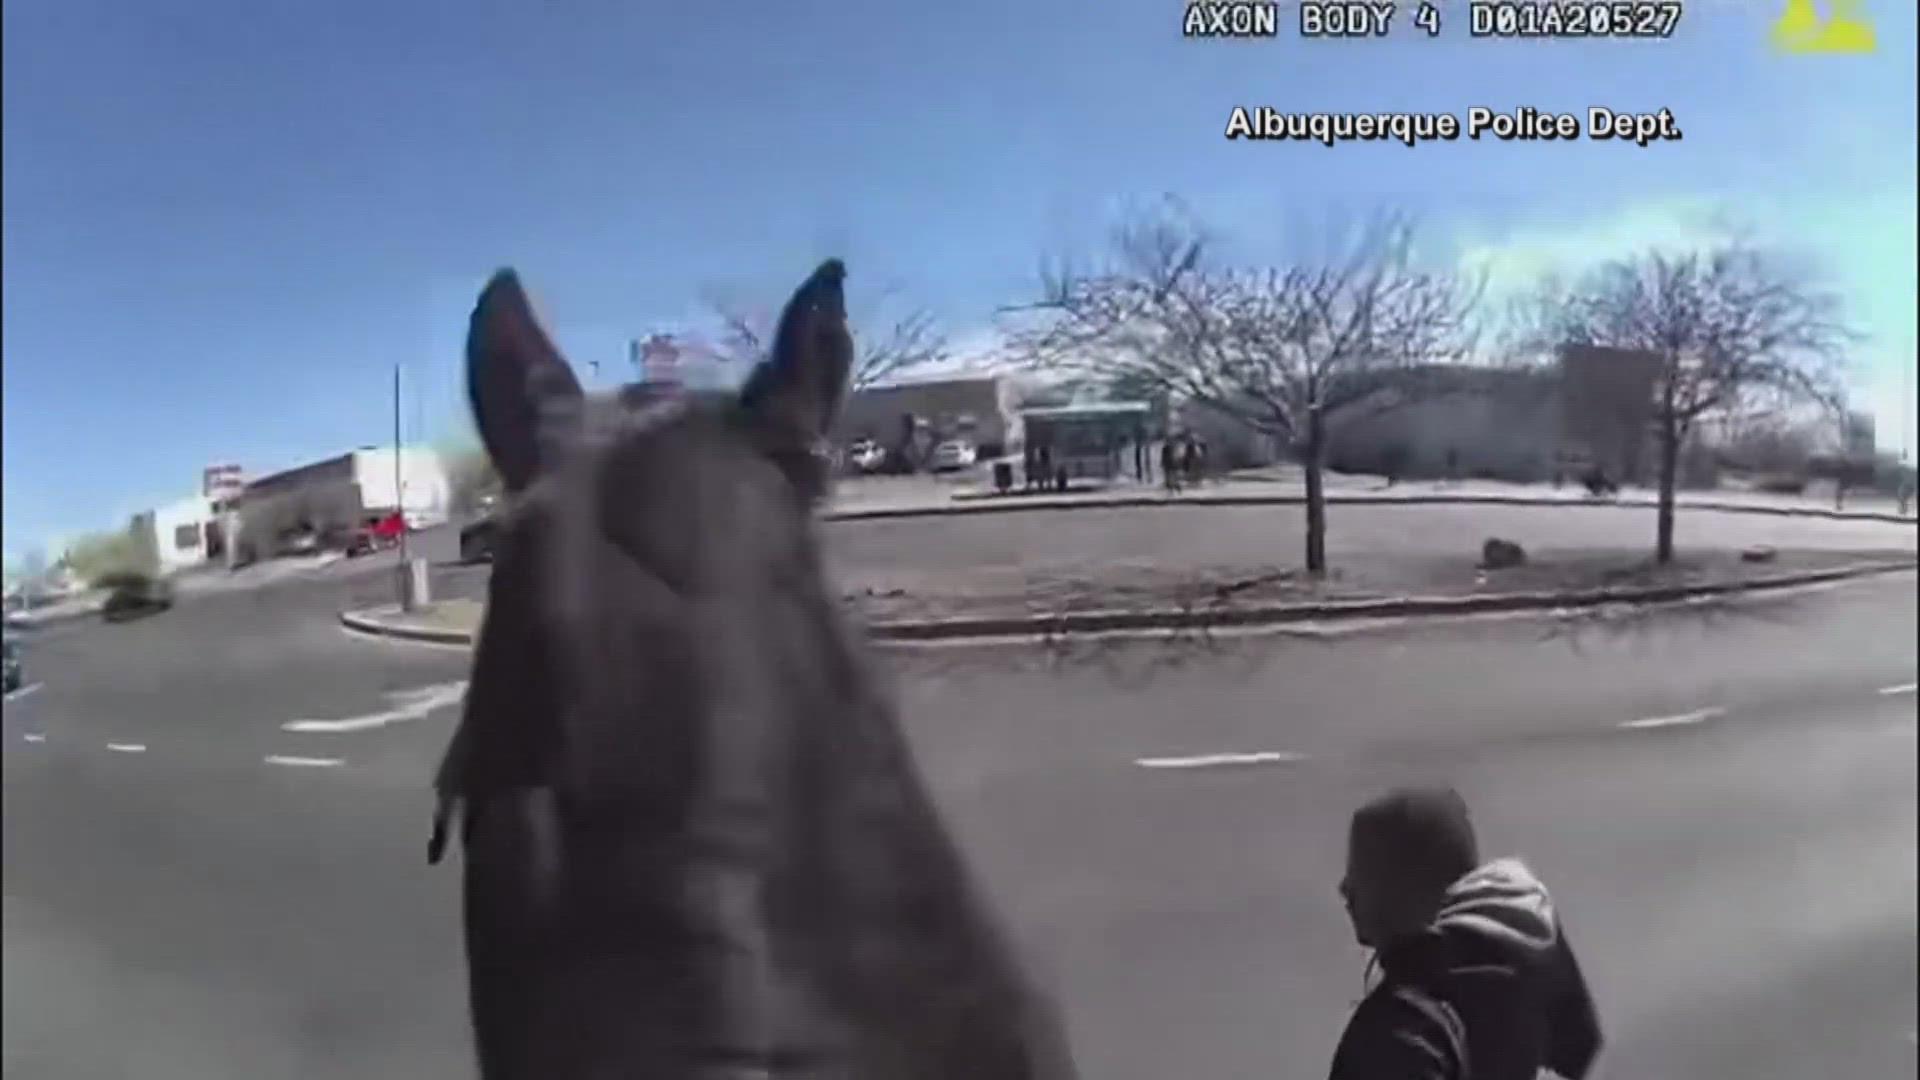 Police in Albuquerque, New Mexico, clearly had all the horsepower in a chase captured on bodycam video.